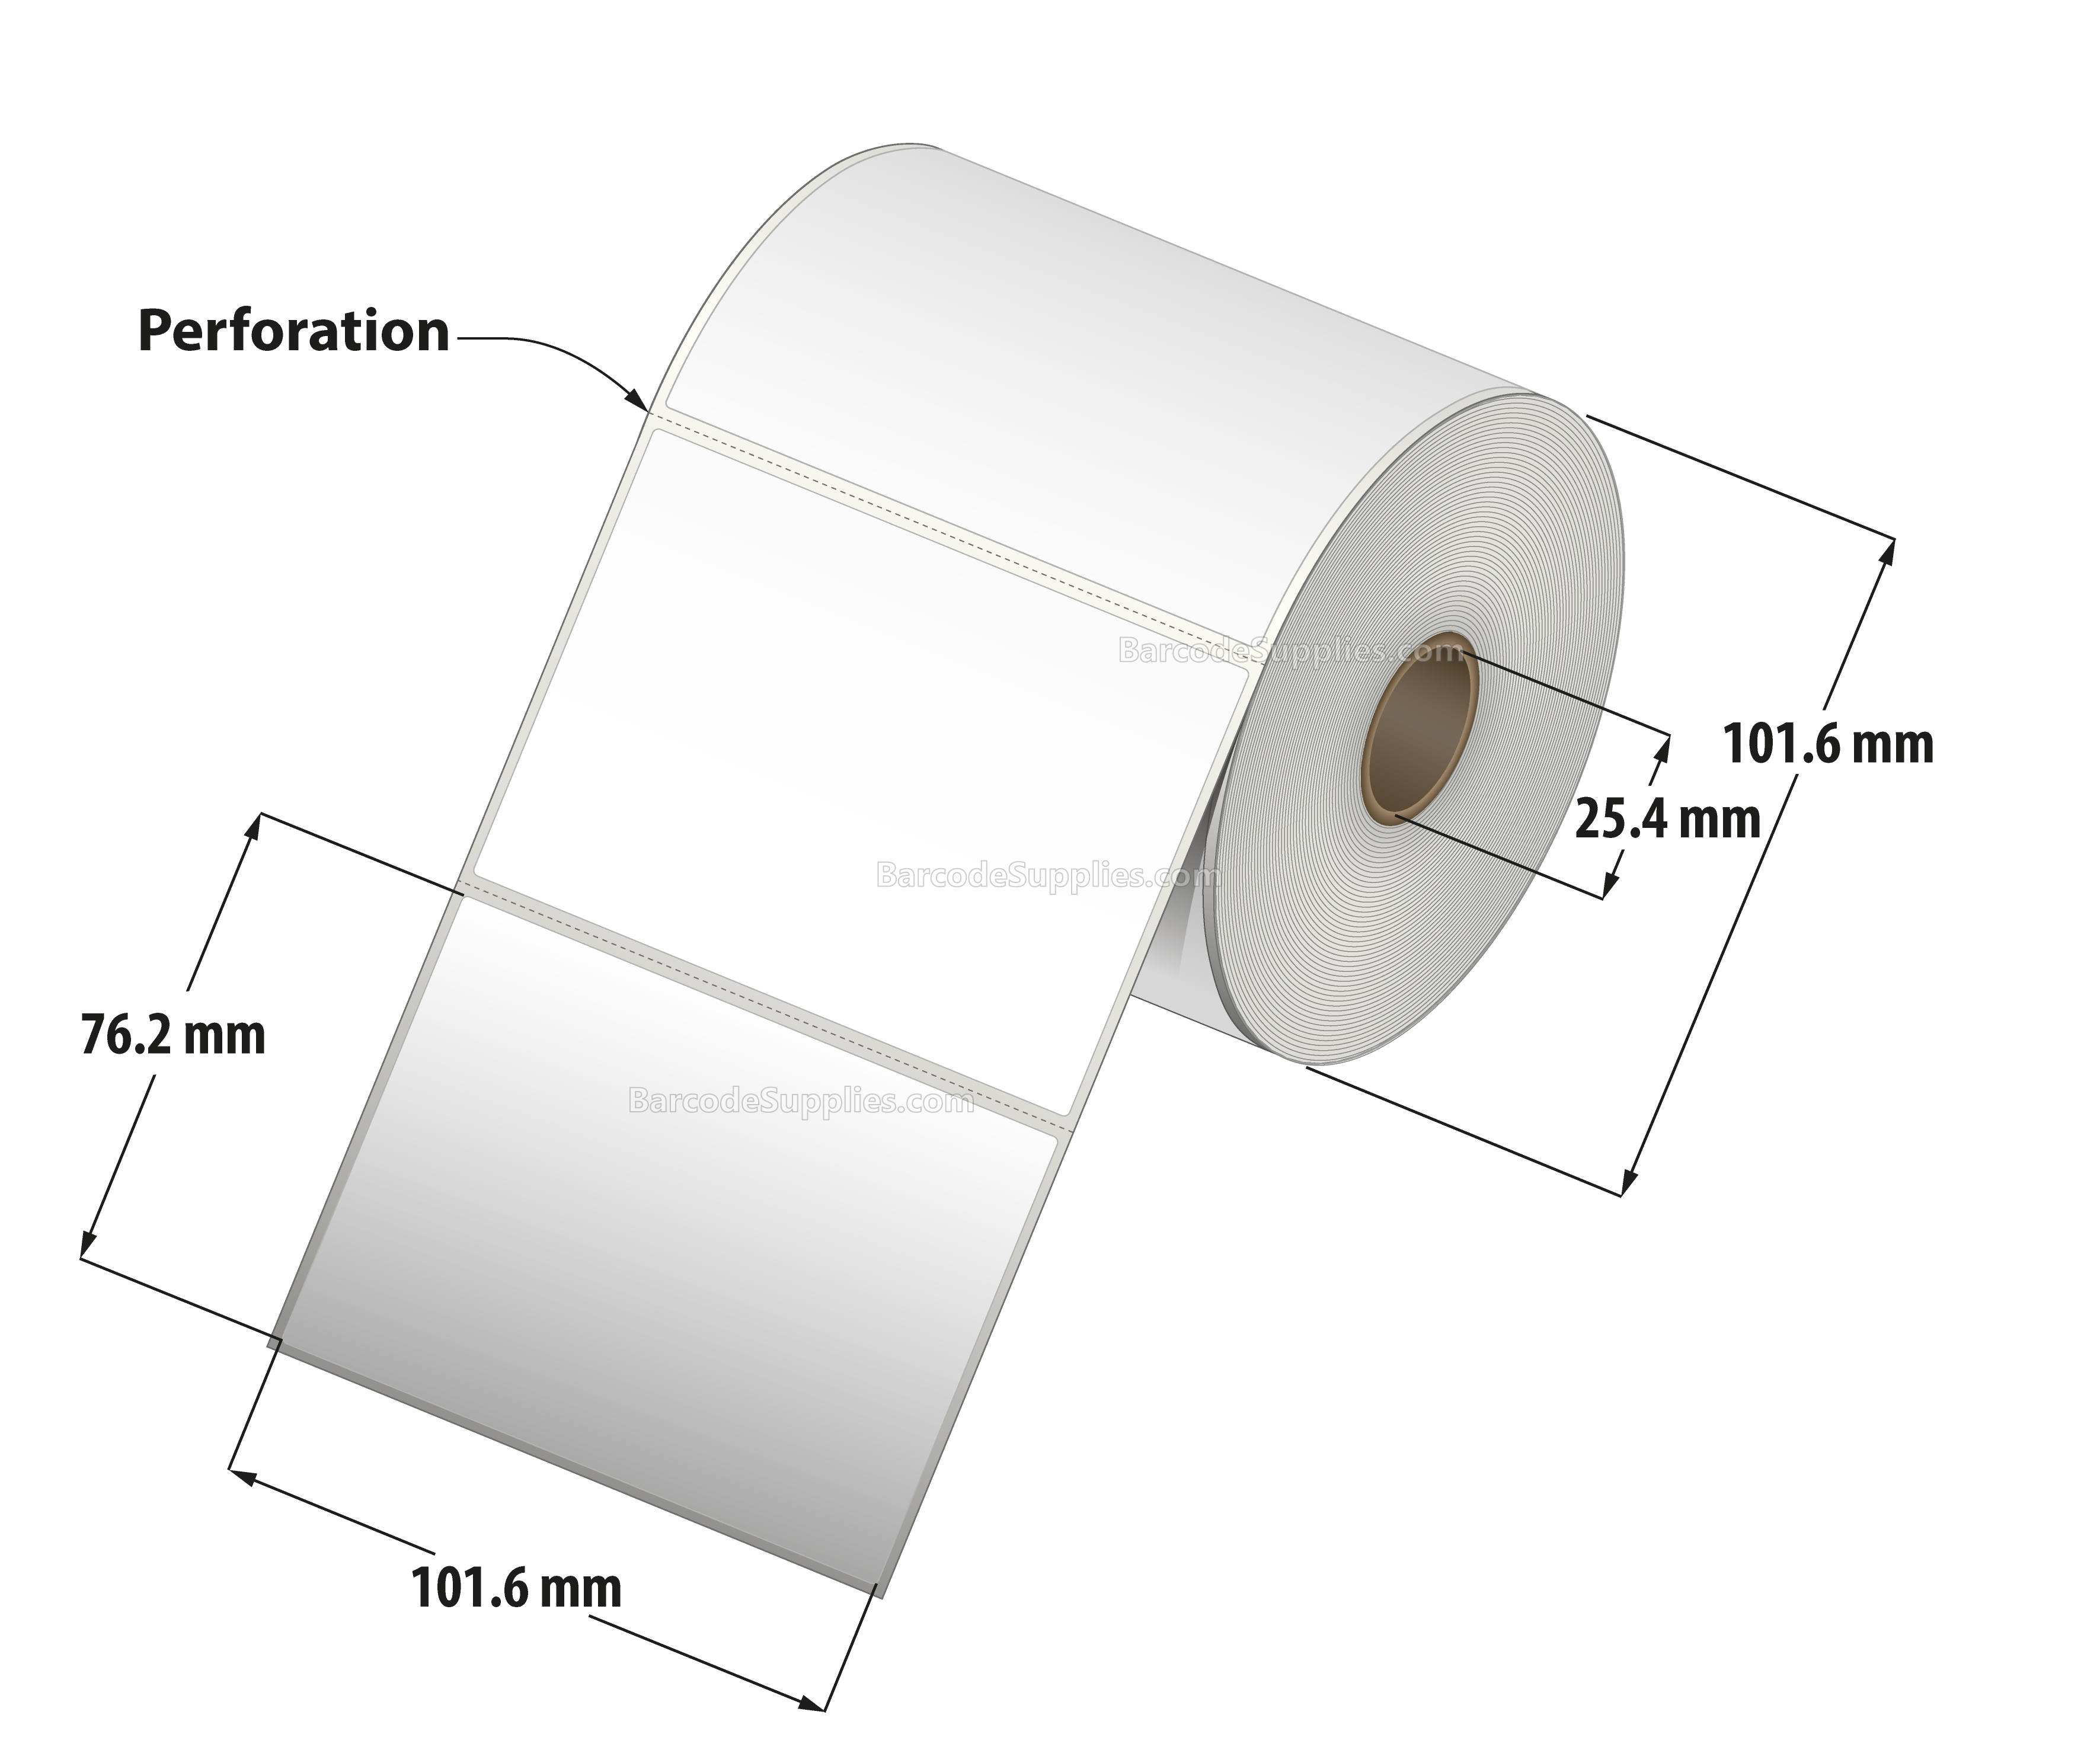 4 x 3 Thermal Transfer White Labels With Permanent Adhesive - Perforated - 500 Labels Per Roll - Carton Of 12 Rolls - 6000 Labels Total - MPN: RT-4-3-500-1 - BarcodeSource, Inc.